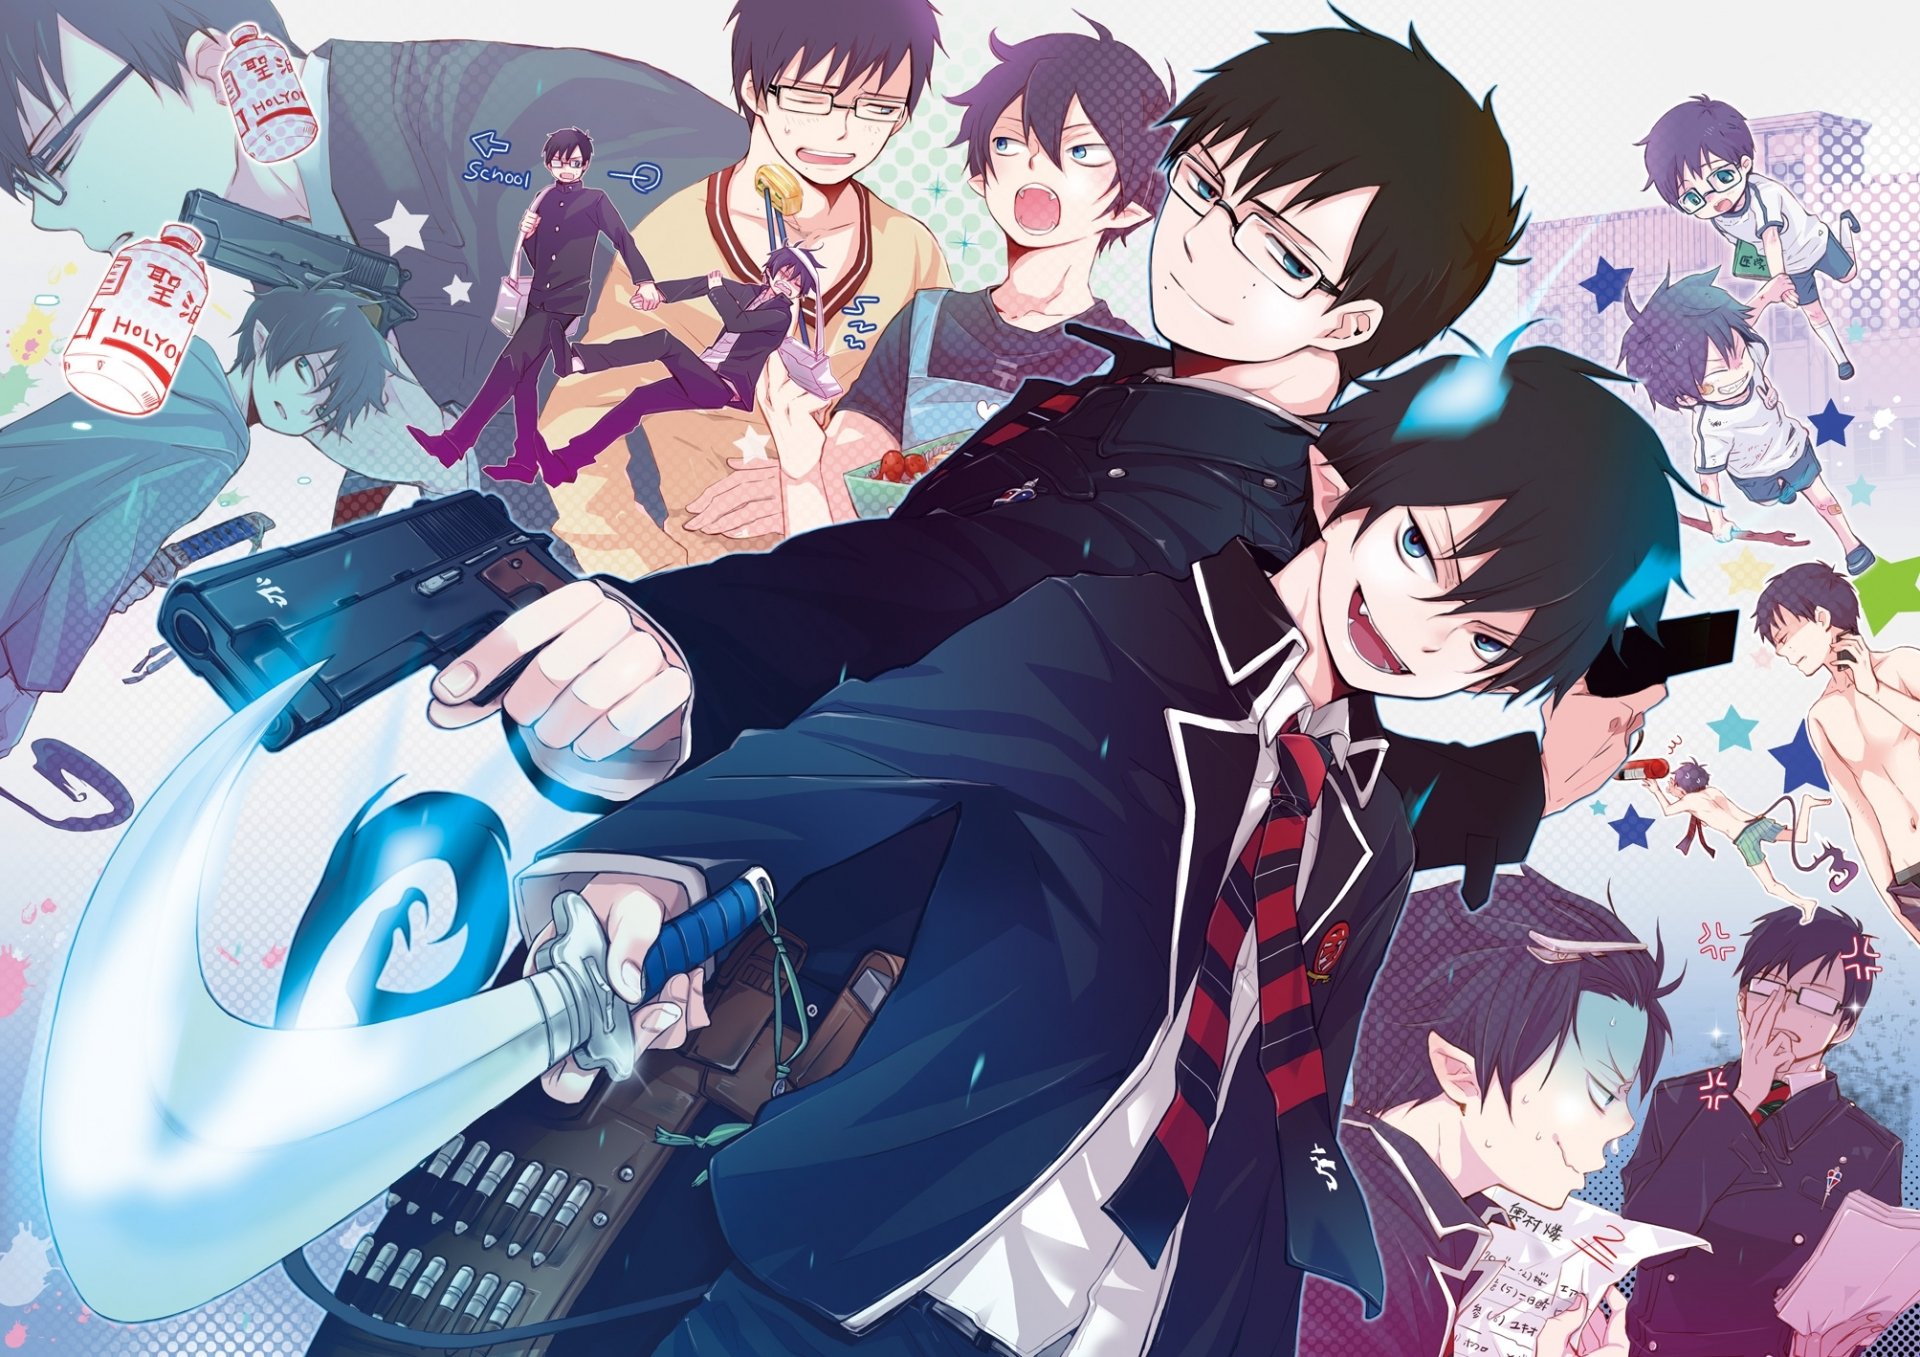 1. "Blue Exorcist" - wide 5